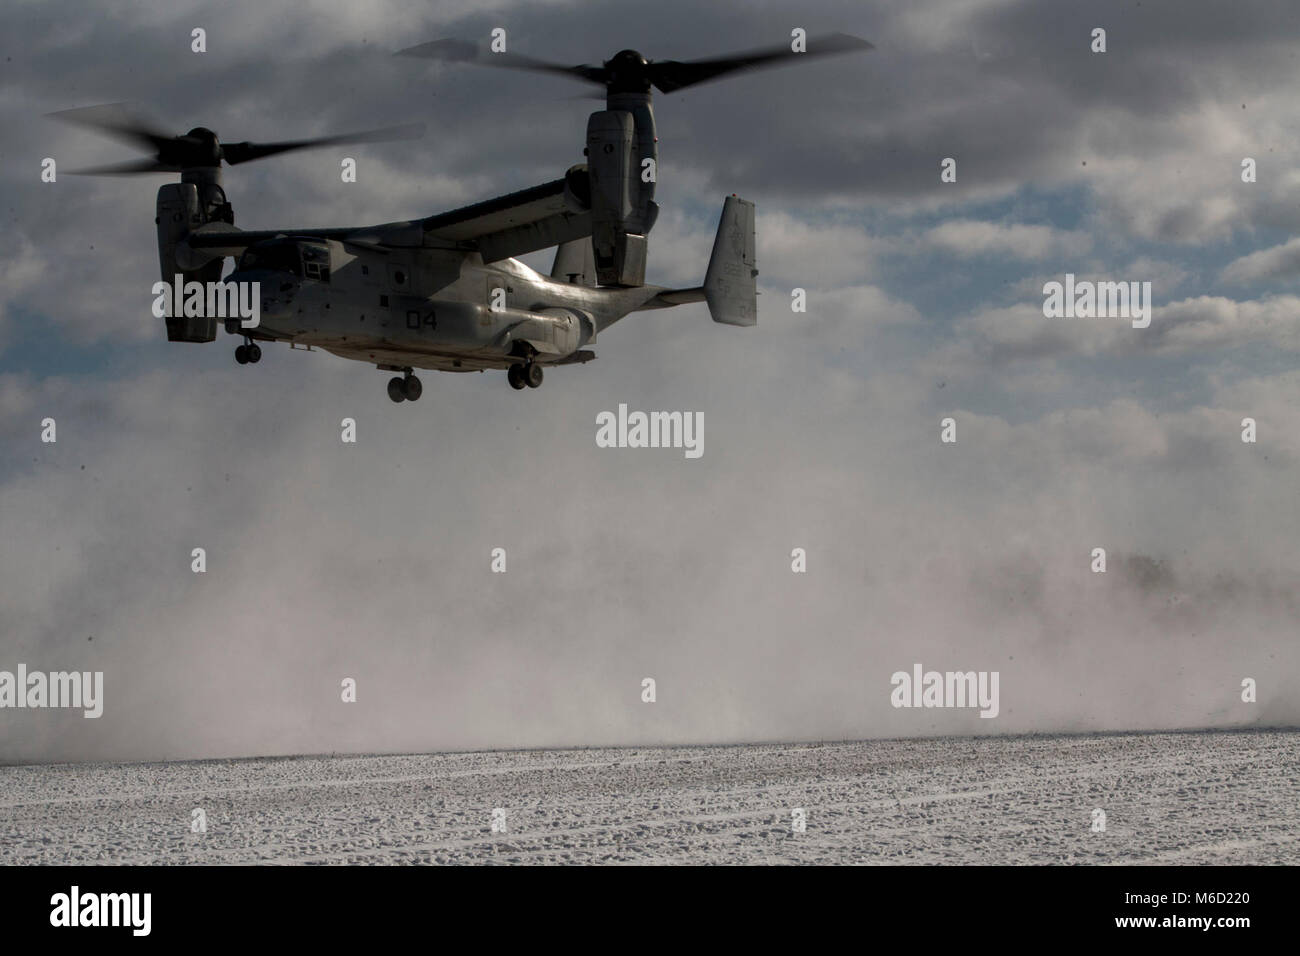 An MV-22B Osprey tiltrotor aircraft lands at Camp Sendai during fast rope drills as part of company unit-level training at Camp Sendai, Miyagi, Japan, Feb. 16, 2018. Charlie Company, Battalion Landing Team, 1st Battalion, 1st Marines, conducted the training to refine their cold-weather capabilities as part of the Ground Combat Element for the 31st MEU. As the Marine Corps' only continuously forward-deployed MEU, the 31st MEU provides a flexible force ready to perform a wide range of military operations. (U.S. Marine Corps photo by Cpl. Stormy Mendez/Released) Stock Photo